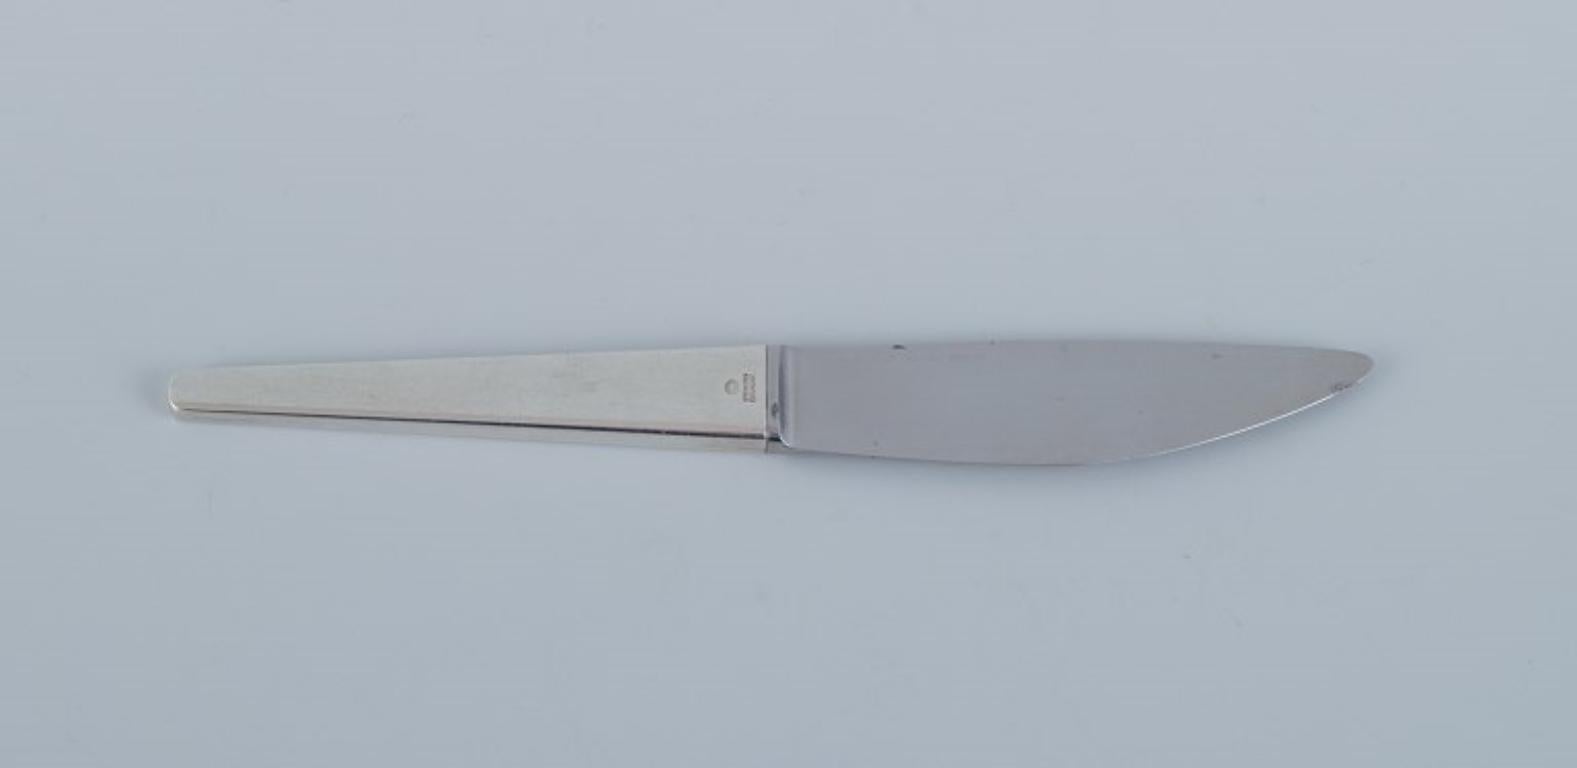 Georg Jensen, Caravel, two lunch knives in sterling silver. 
Stainless steel blade.
Modernist and sleek design.
Designed by Henning Koppel.
From the 1960s.
Stamped with the hallmark used after 1944.
In excellent condition.
Dimensions: L 19.3 cm.